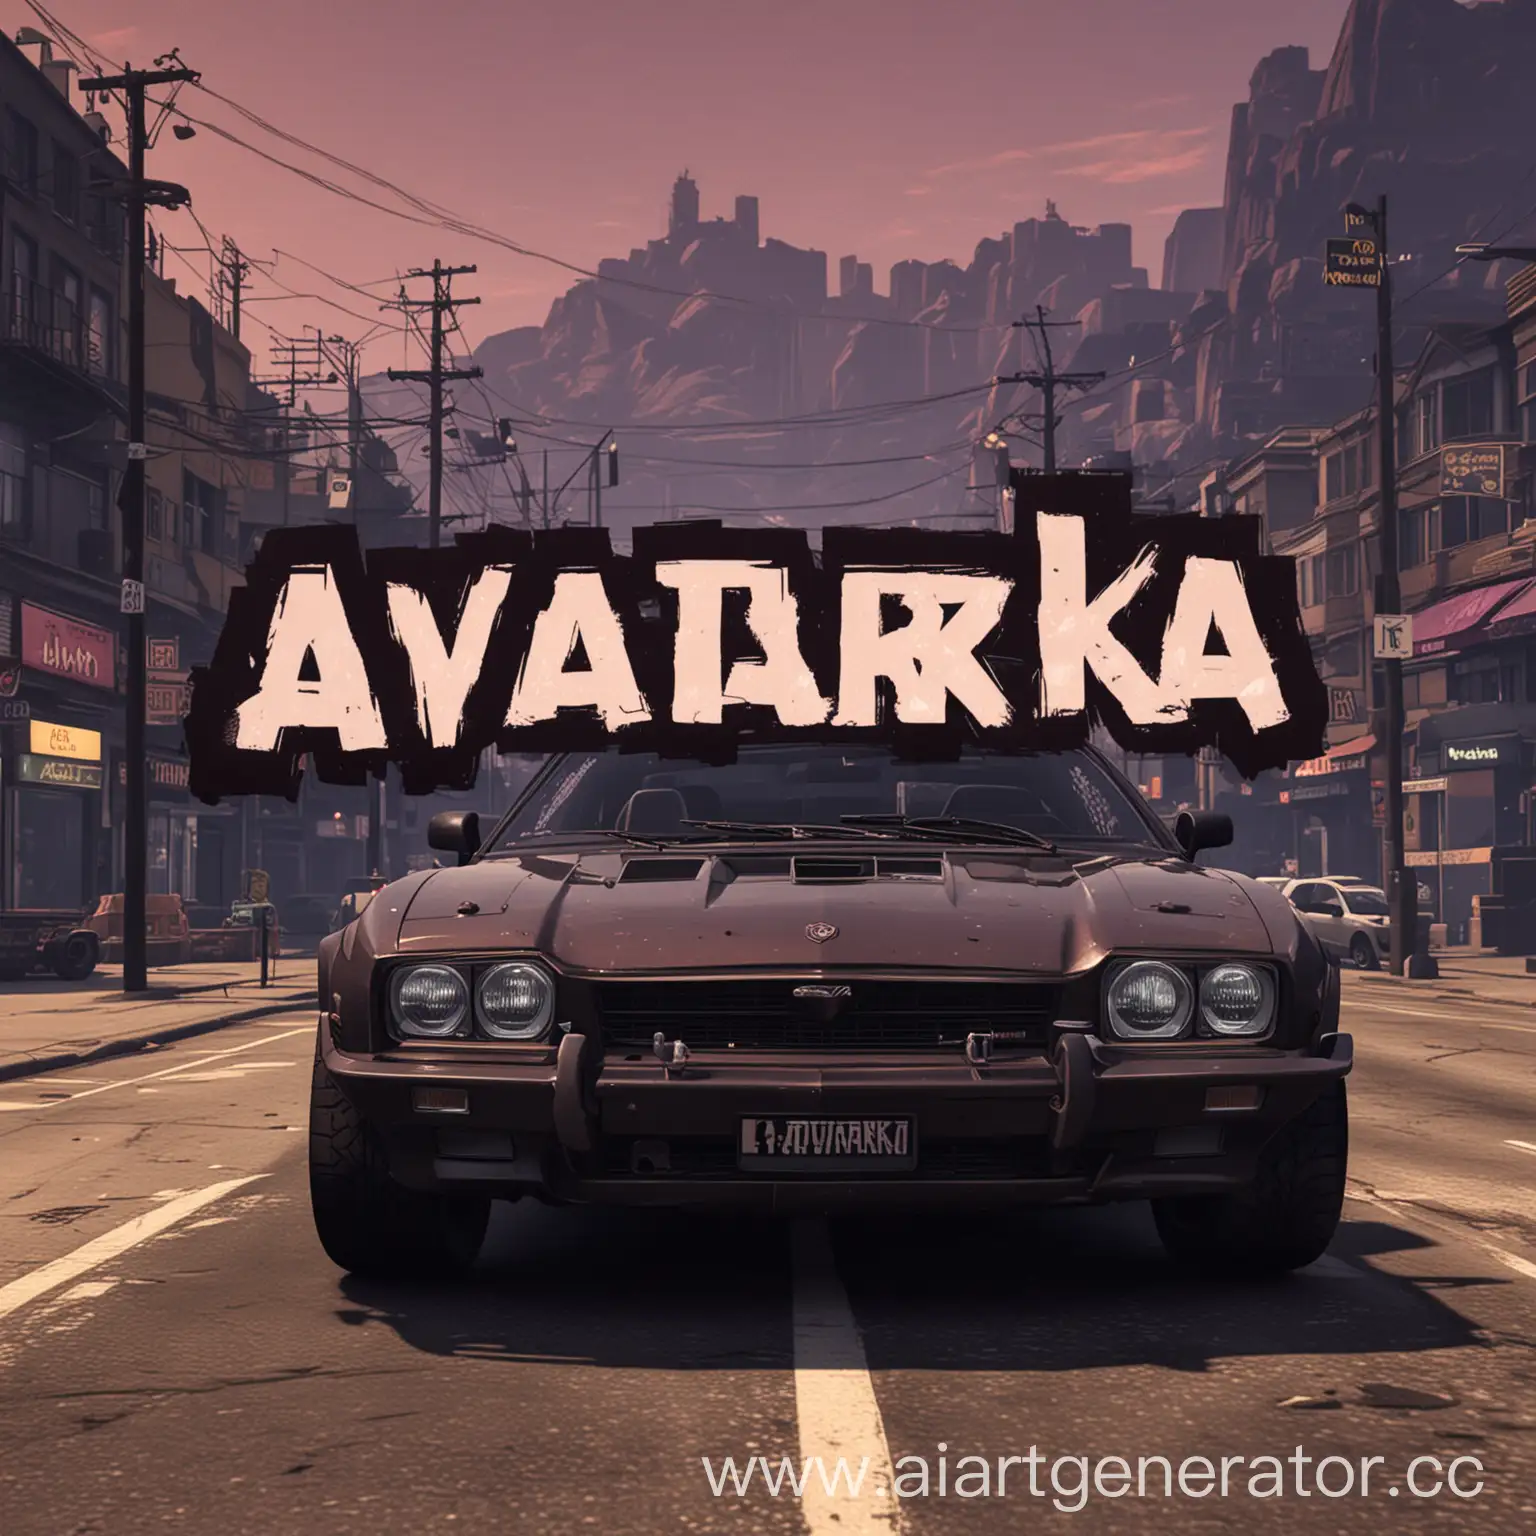 Avatarka-in-GTA-5-Style-with-Dark-Colors-and-FAMQ-Inscription